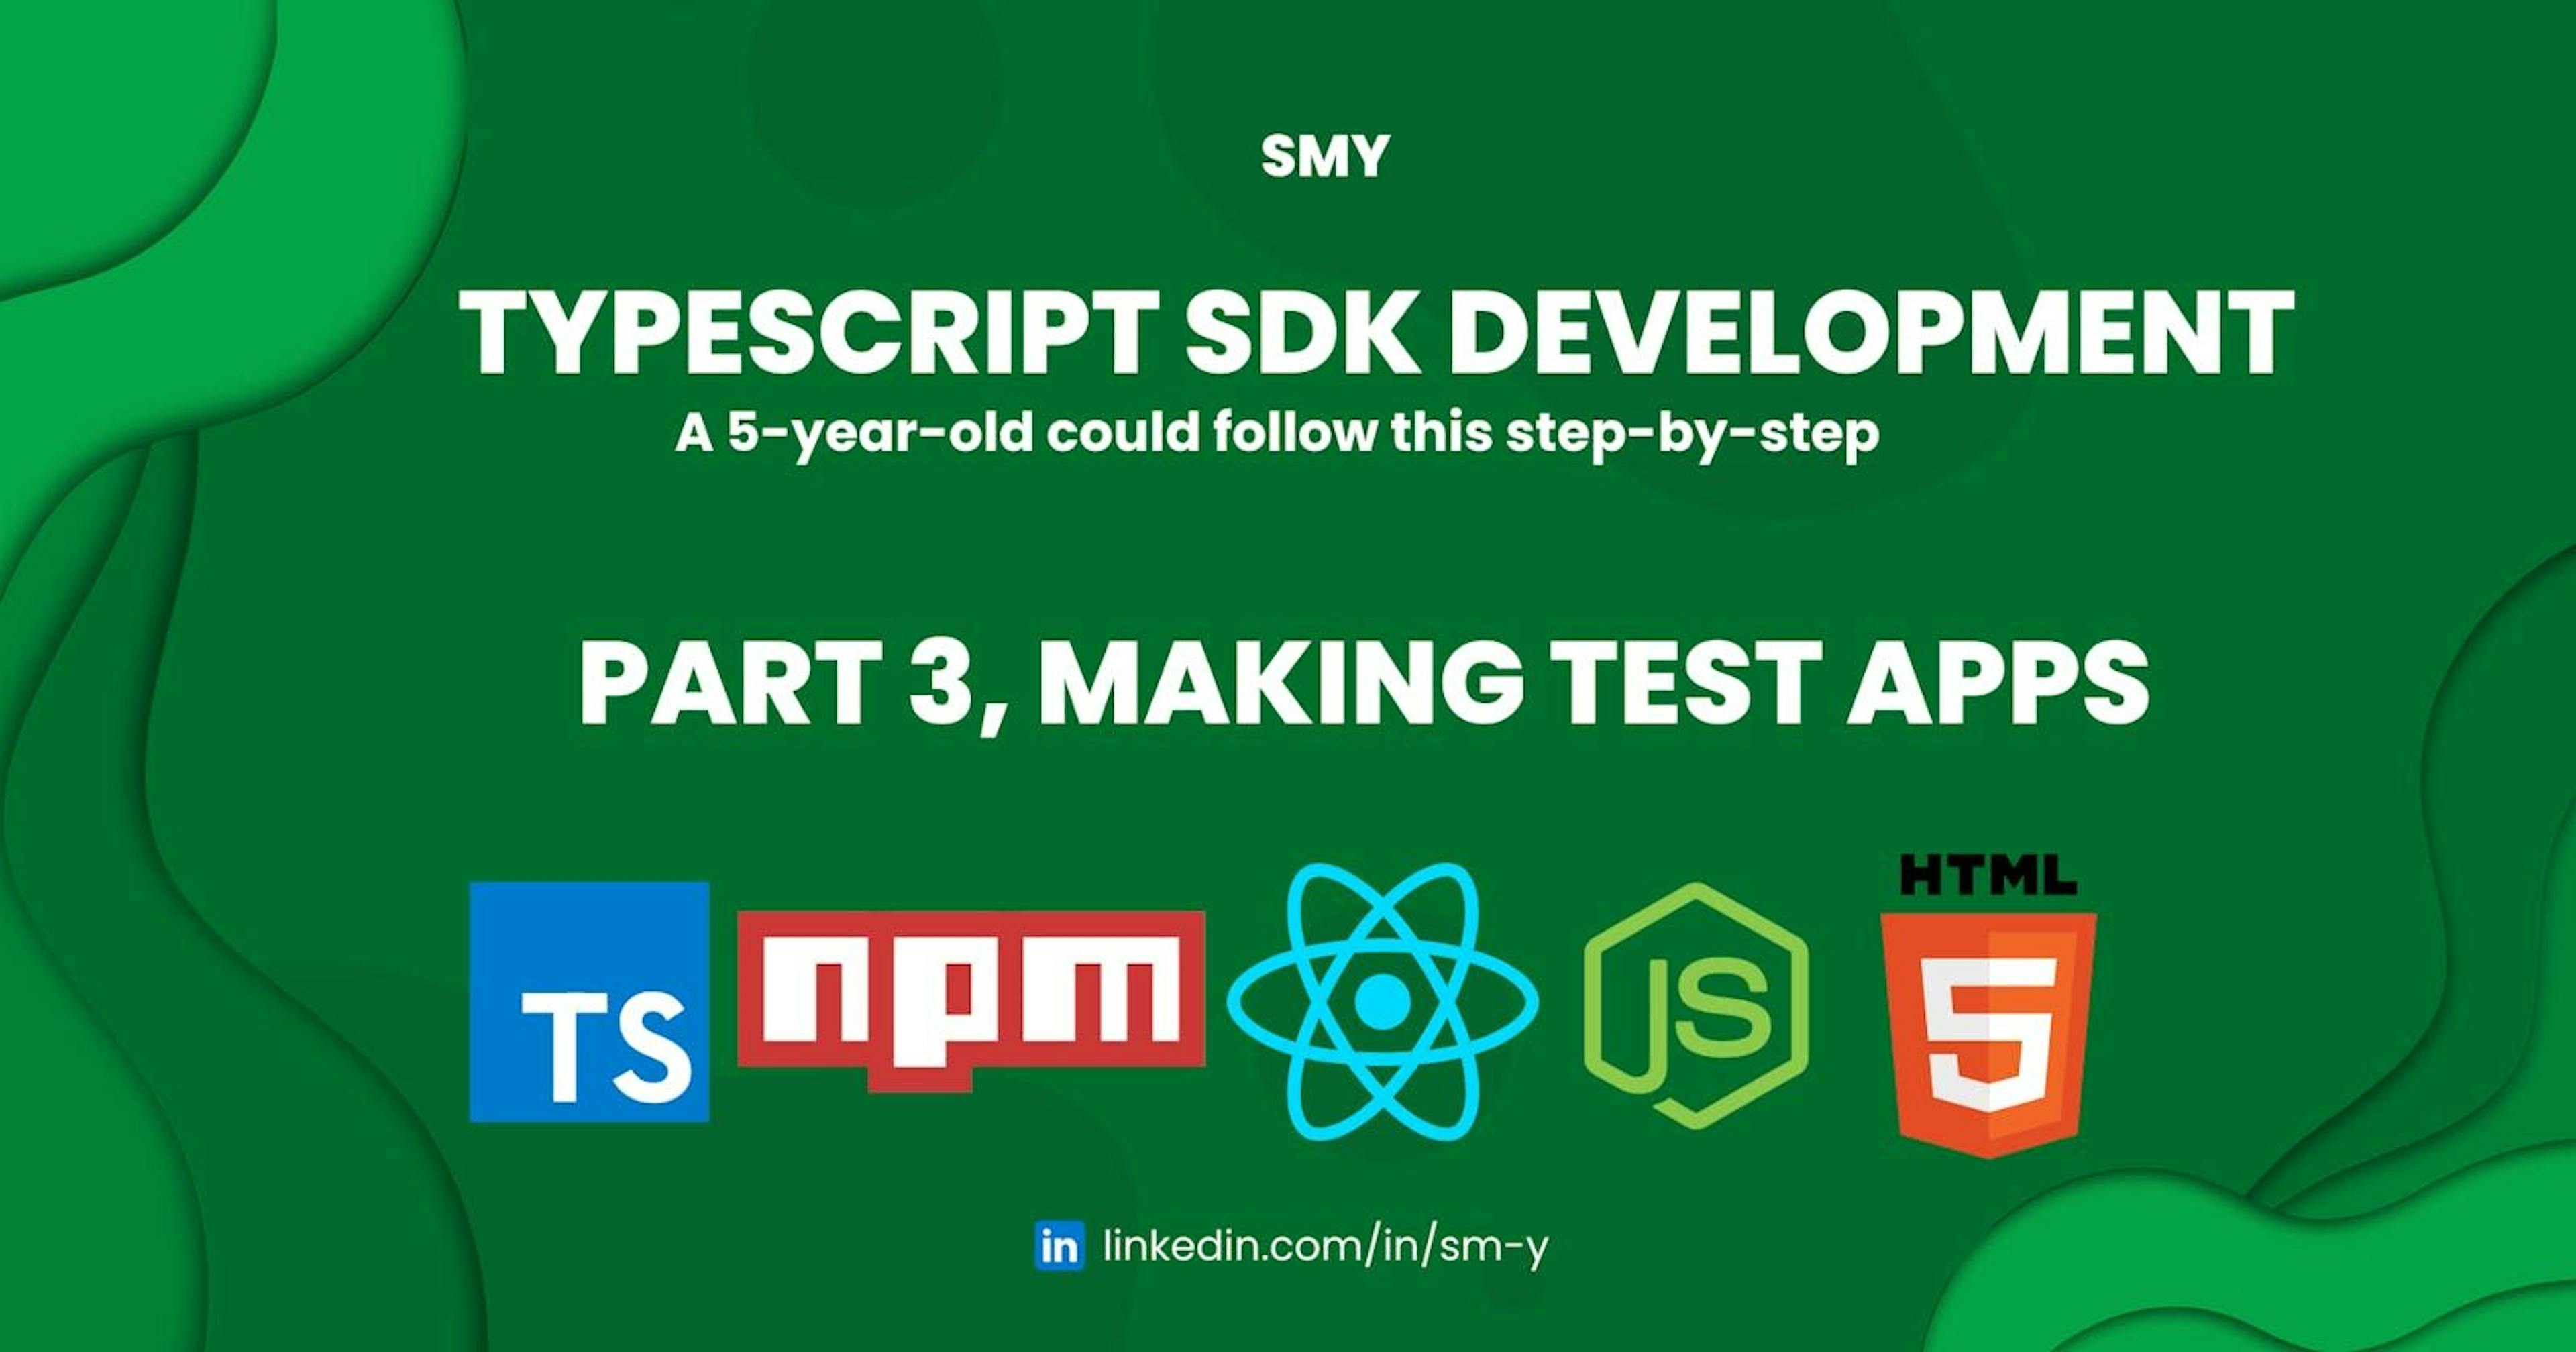 /a-5-year-old-could-follow-this-typescript-sdk-development-guide-part-3-making-test-apps feature image